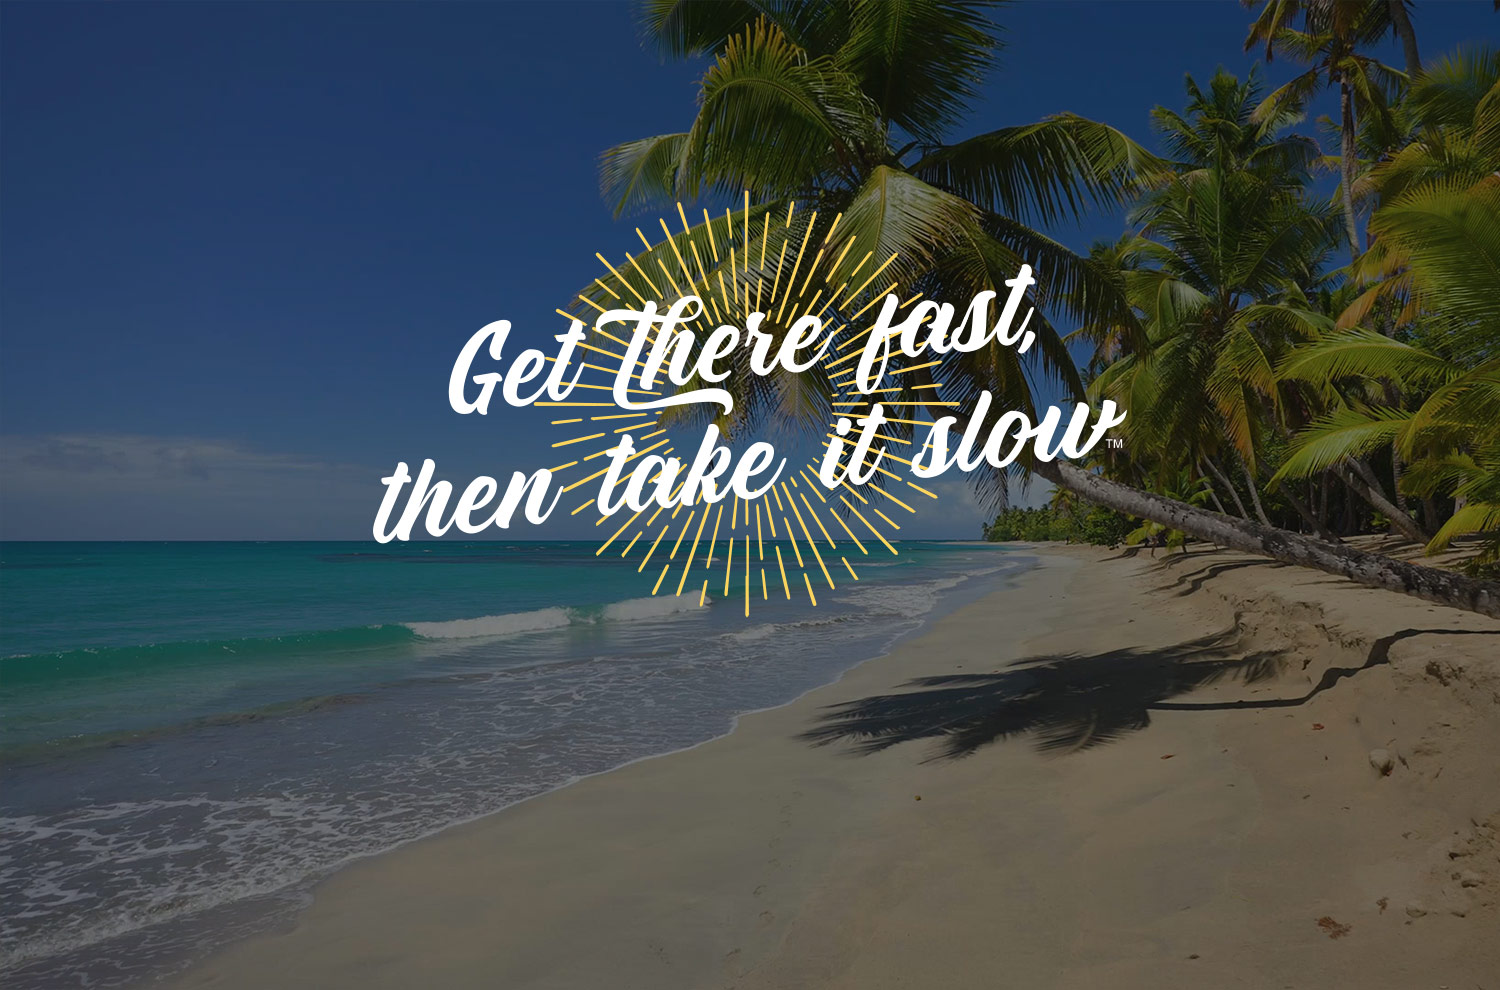 Image of Palm Trees and text "Get there fast..."